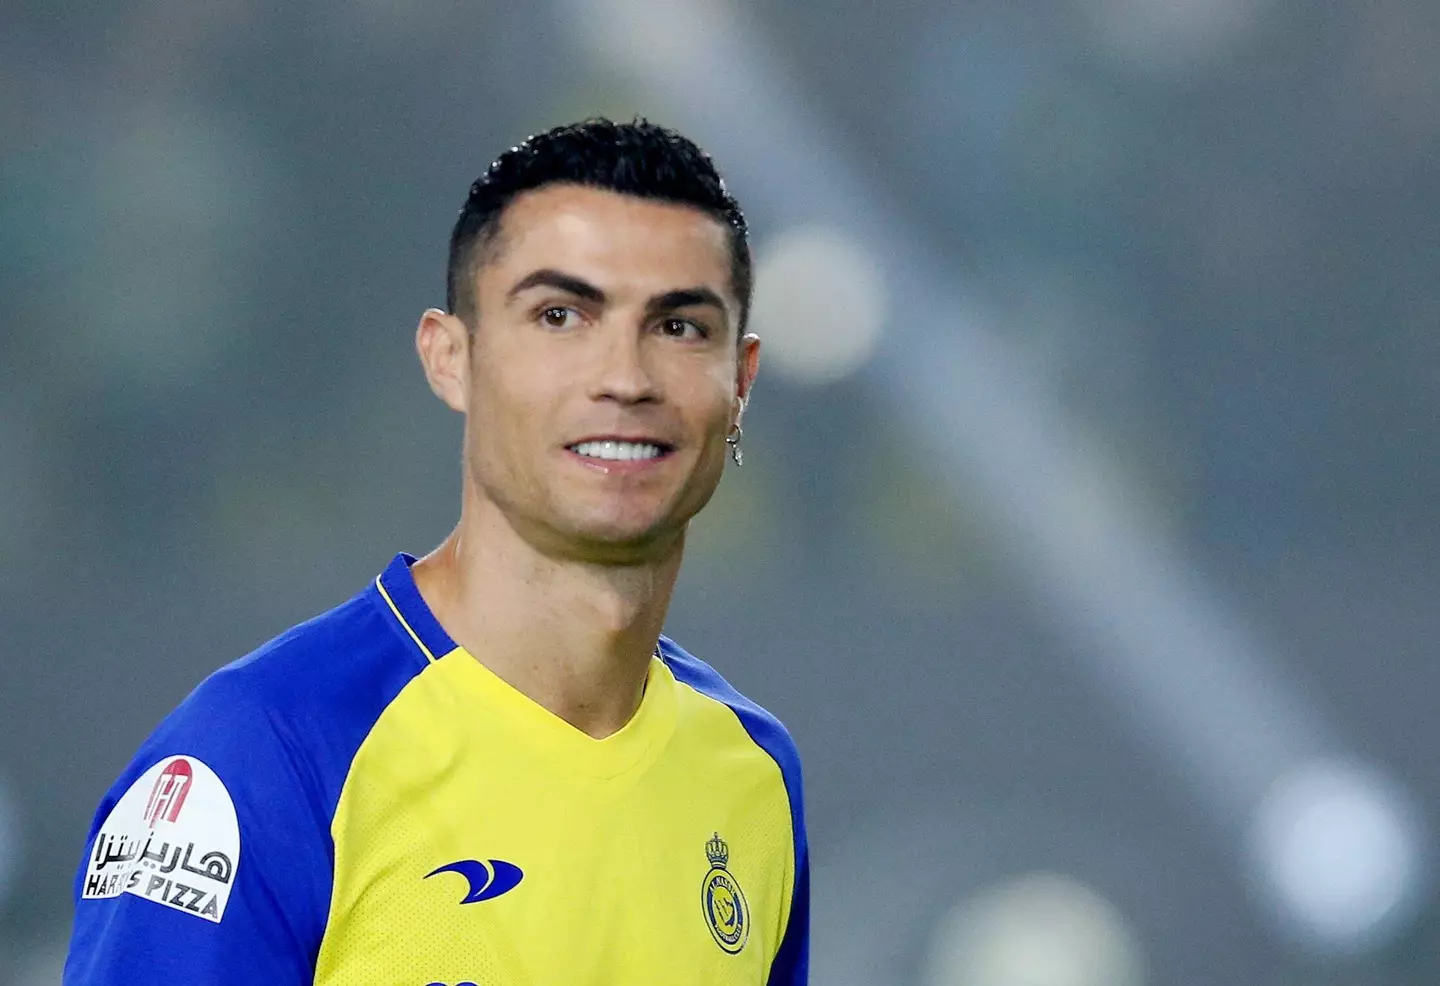 Al Nassr fans might not see Ronaldo assist very often, but Real fans certainly did.